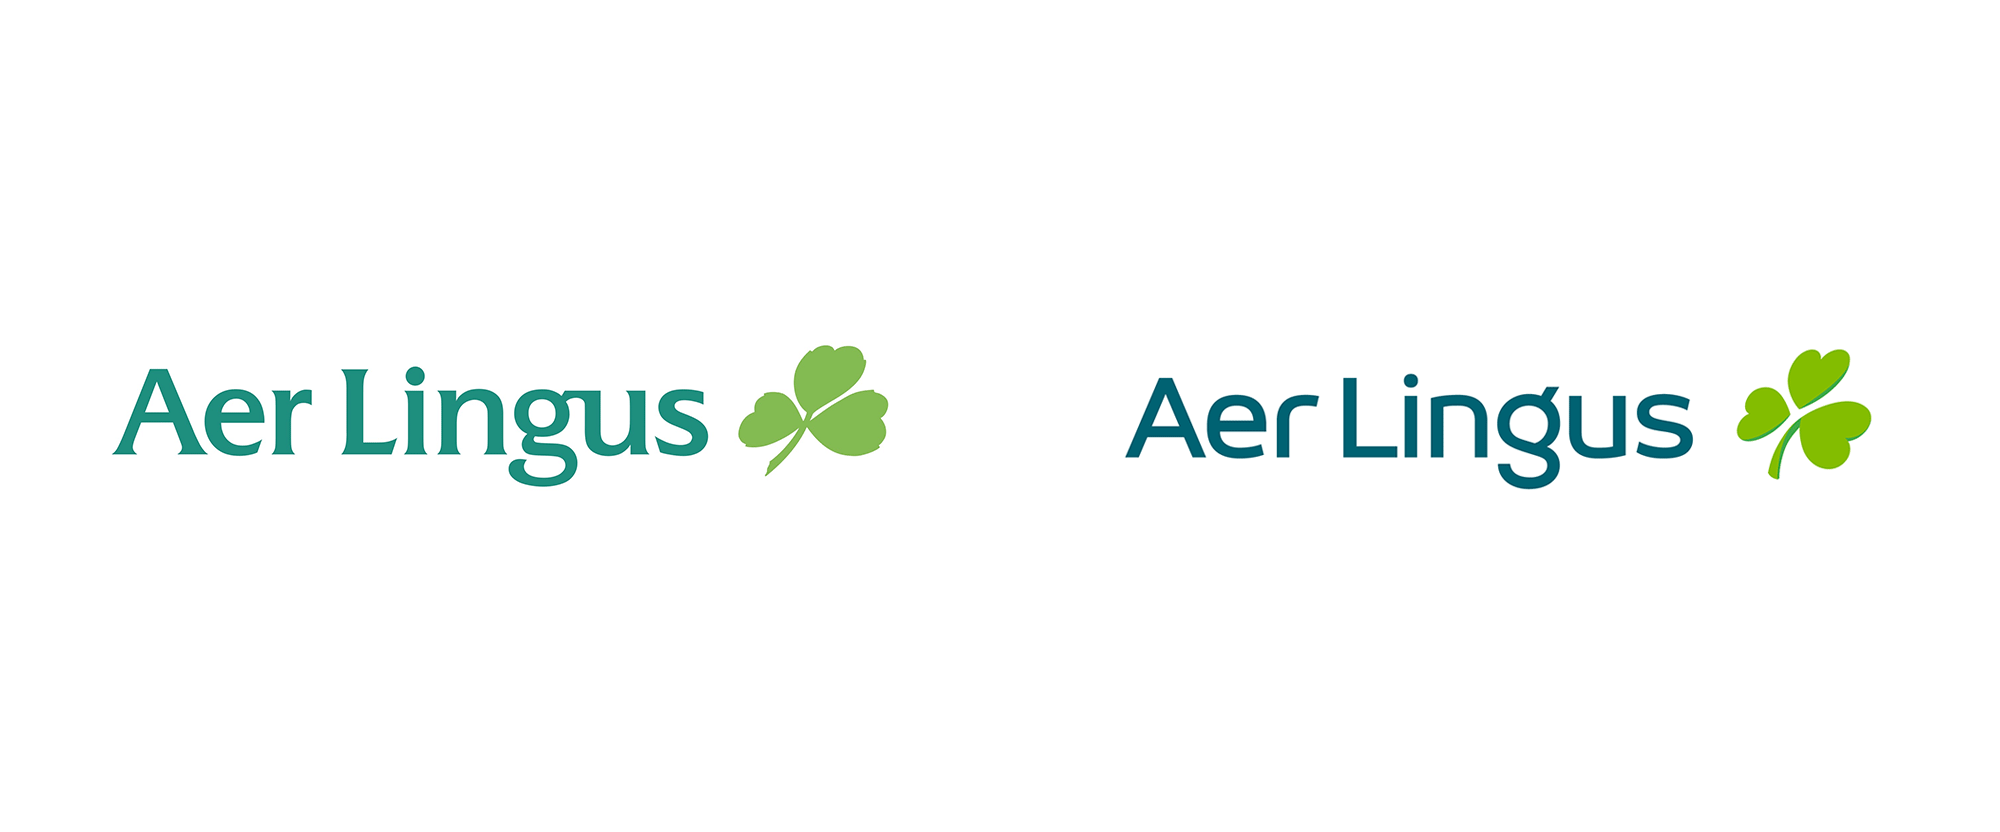 Brand New: New Logo, Identity, and Livery for Aer Lingus by Lippincott.